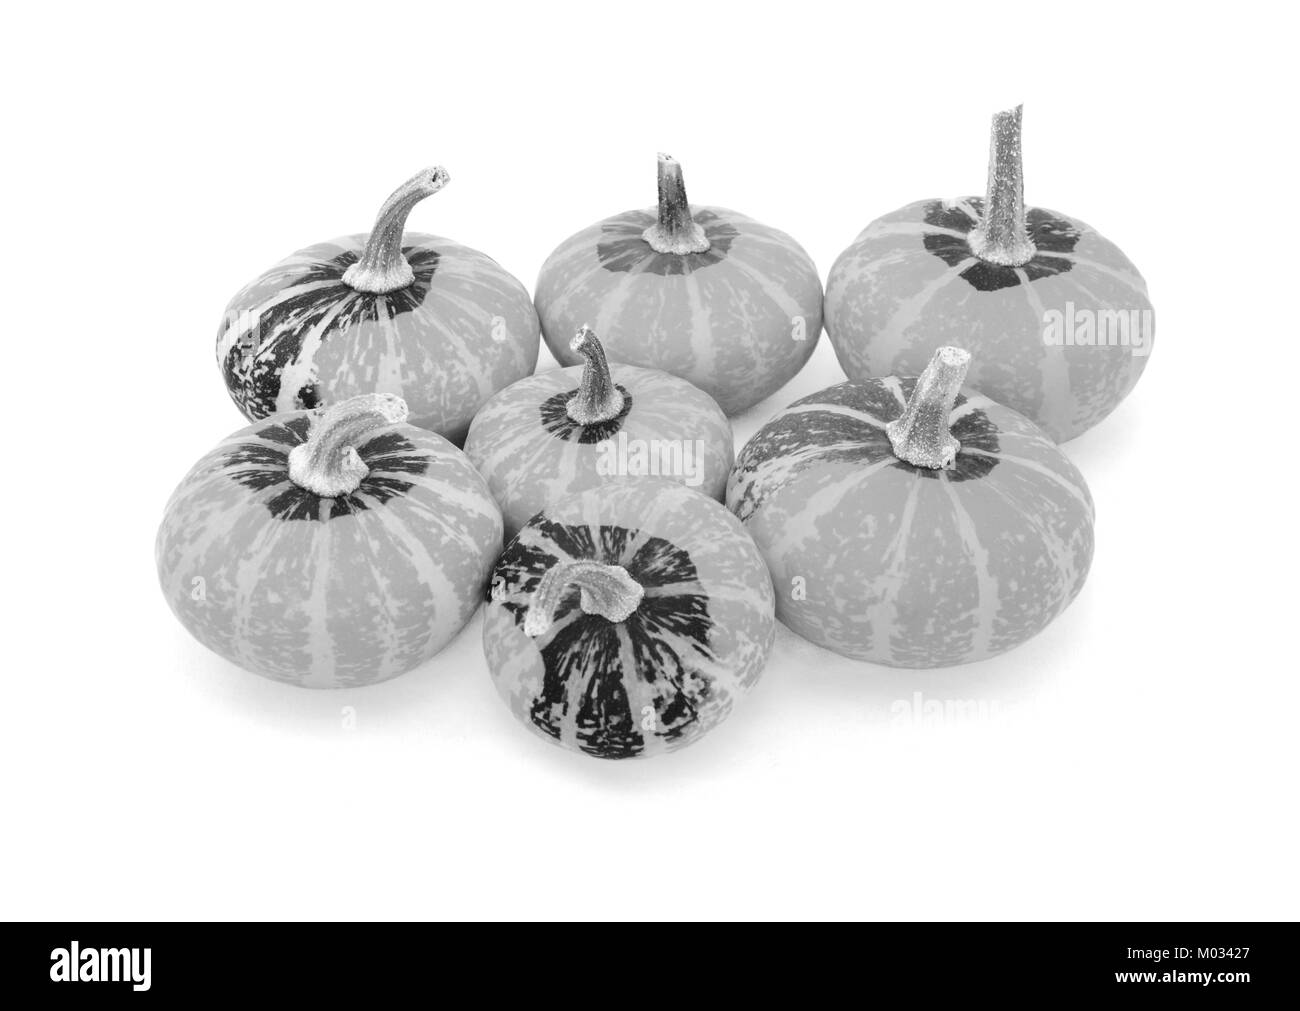 Group of seven small disc-shaped ornamental gourds with multicolored markings, isolated on a white background - monochrome processing Stock Photo